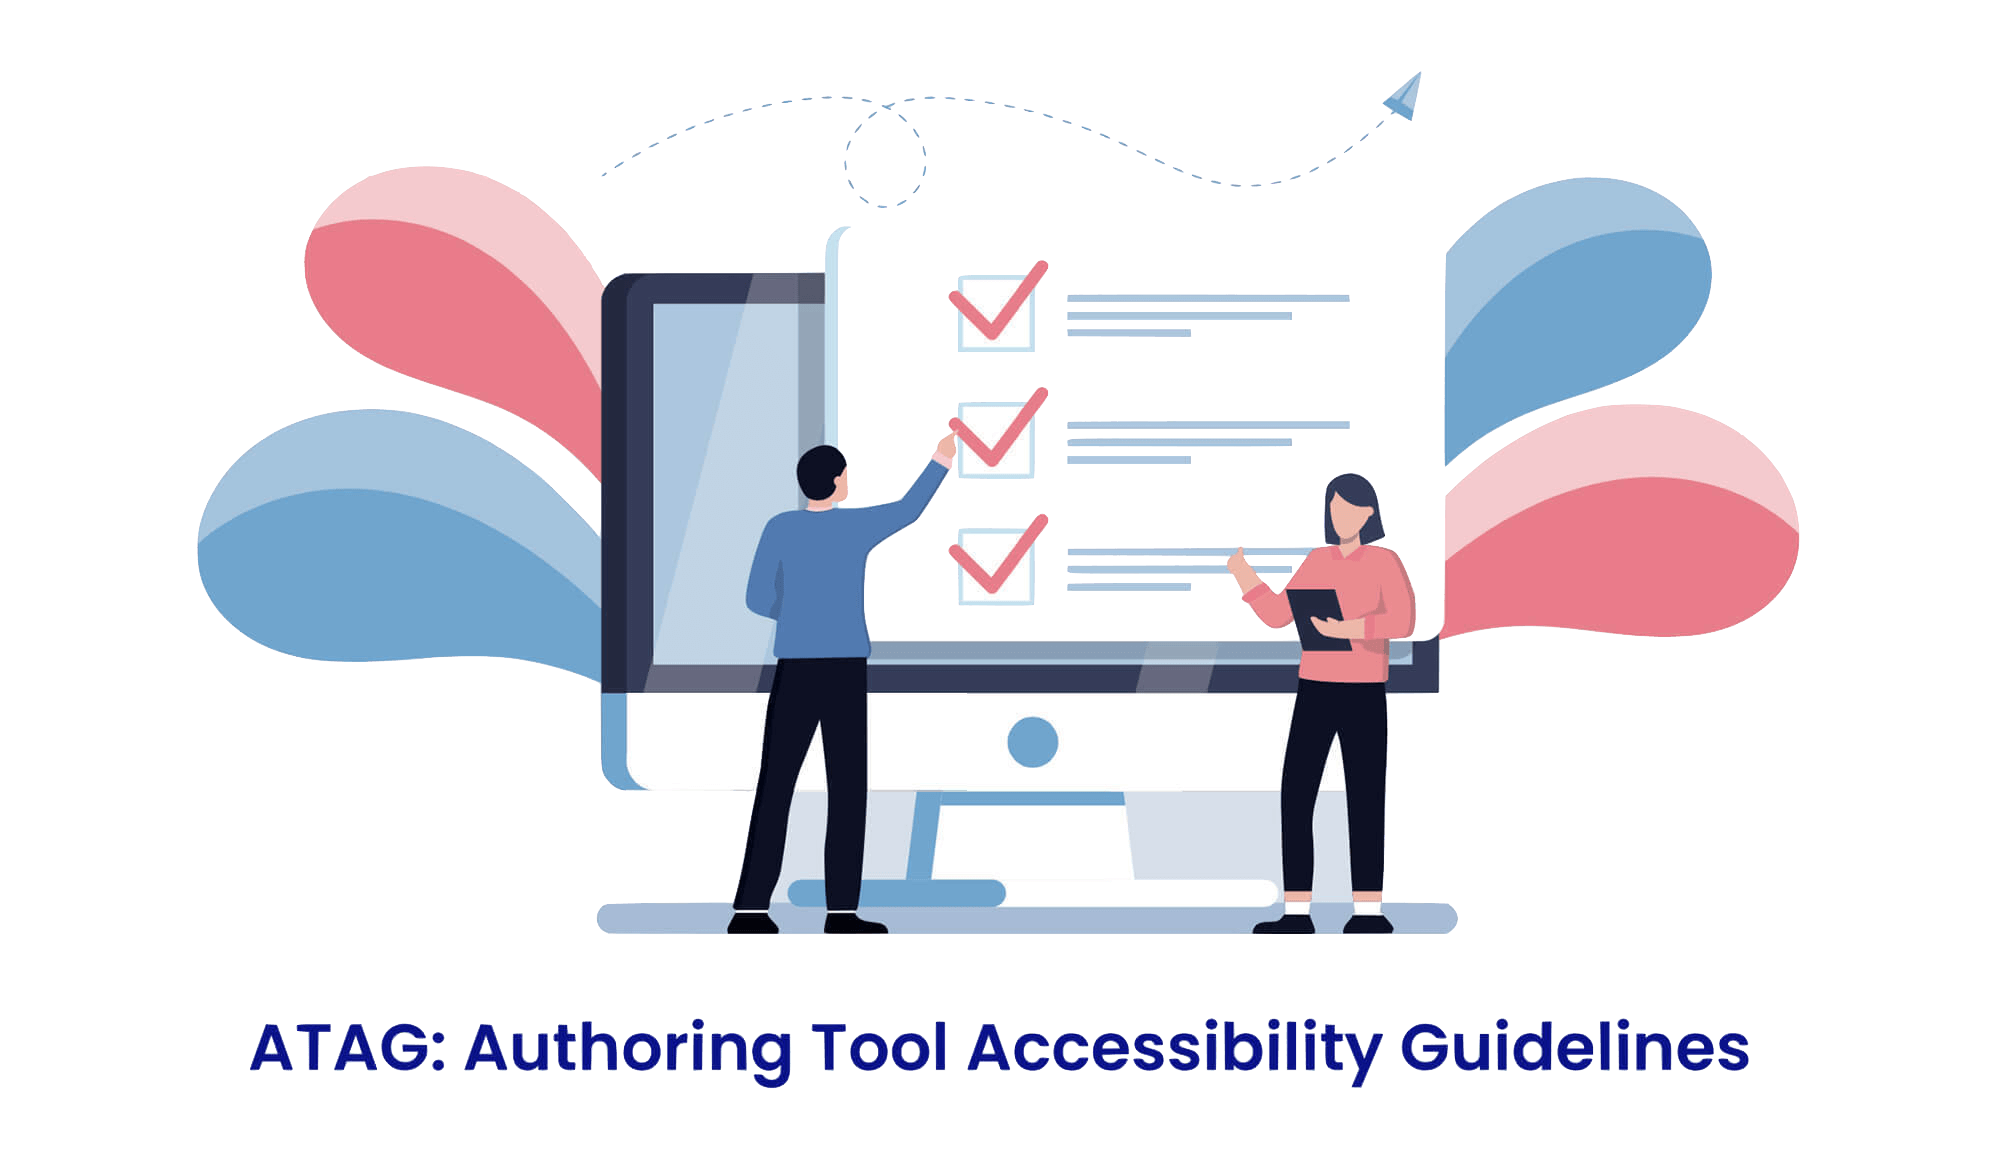 Overview of the Authoring Tools Accessibility - ATAG 2.0 Guidelines